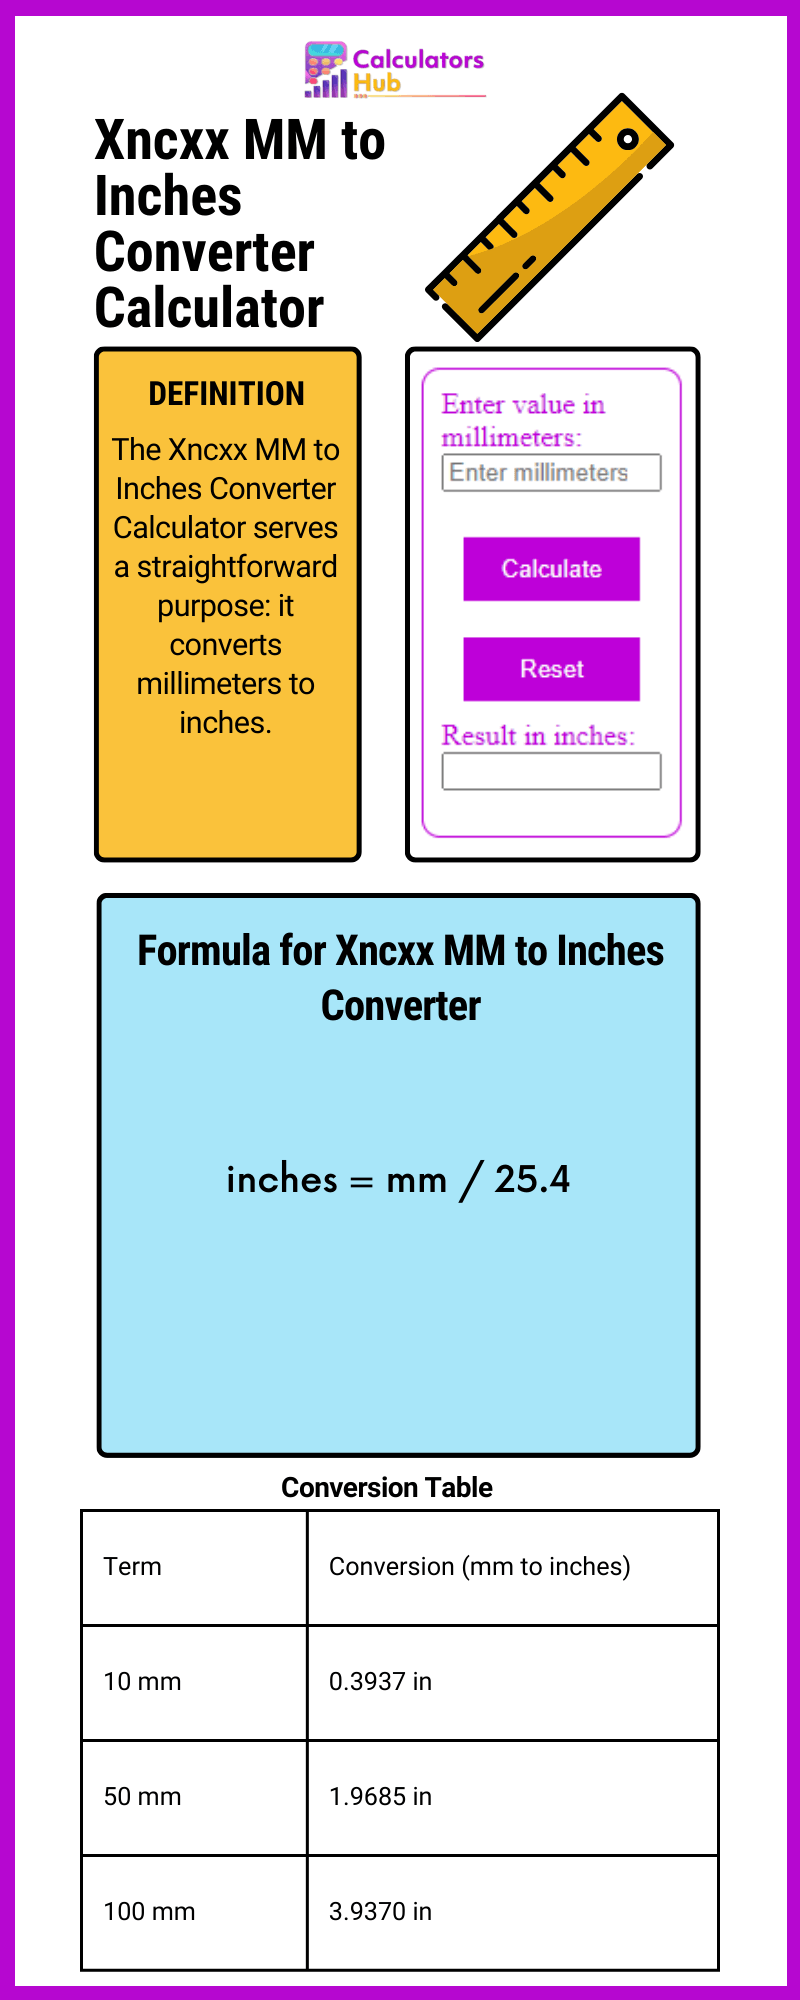 Xncxx MM to Inches Converter Calculator